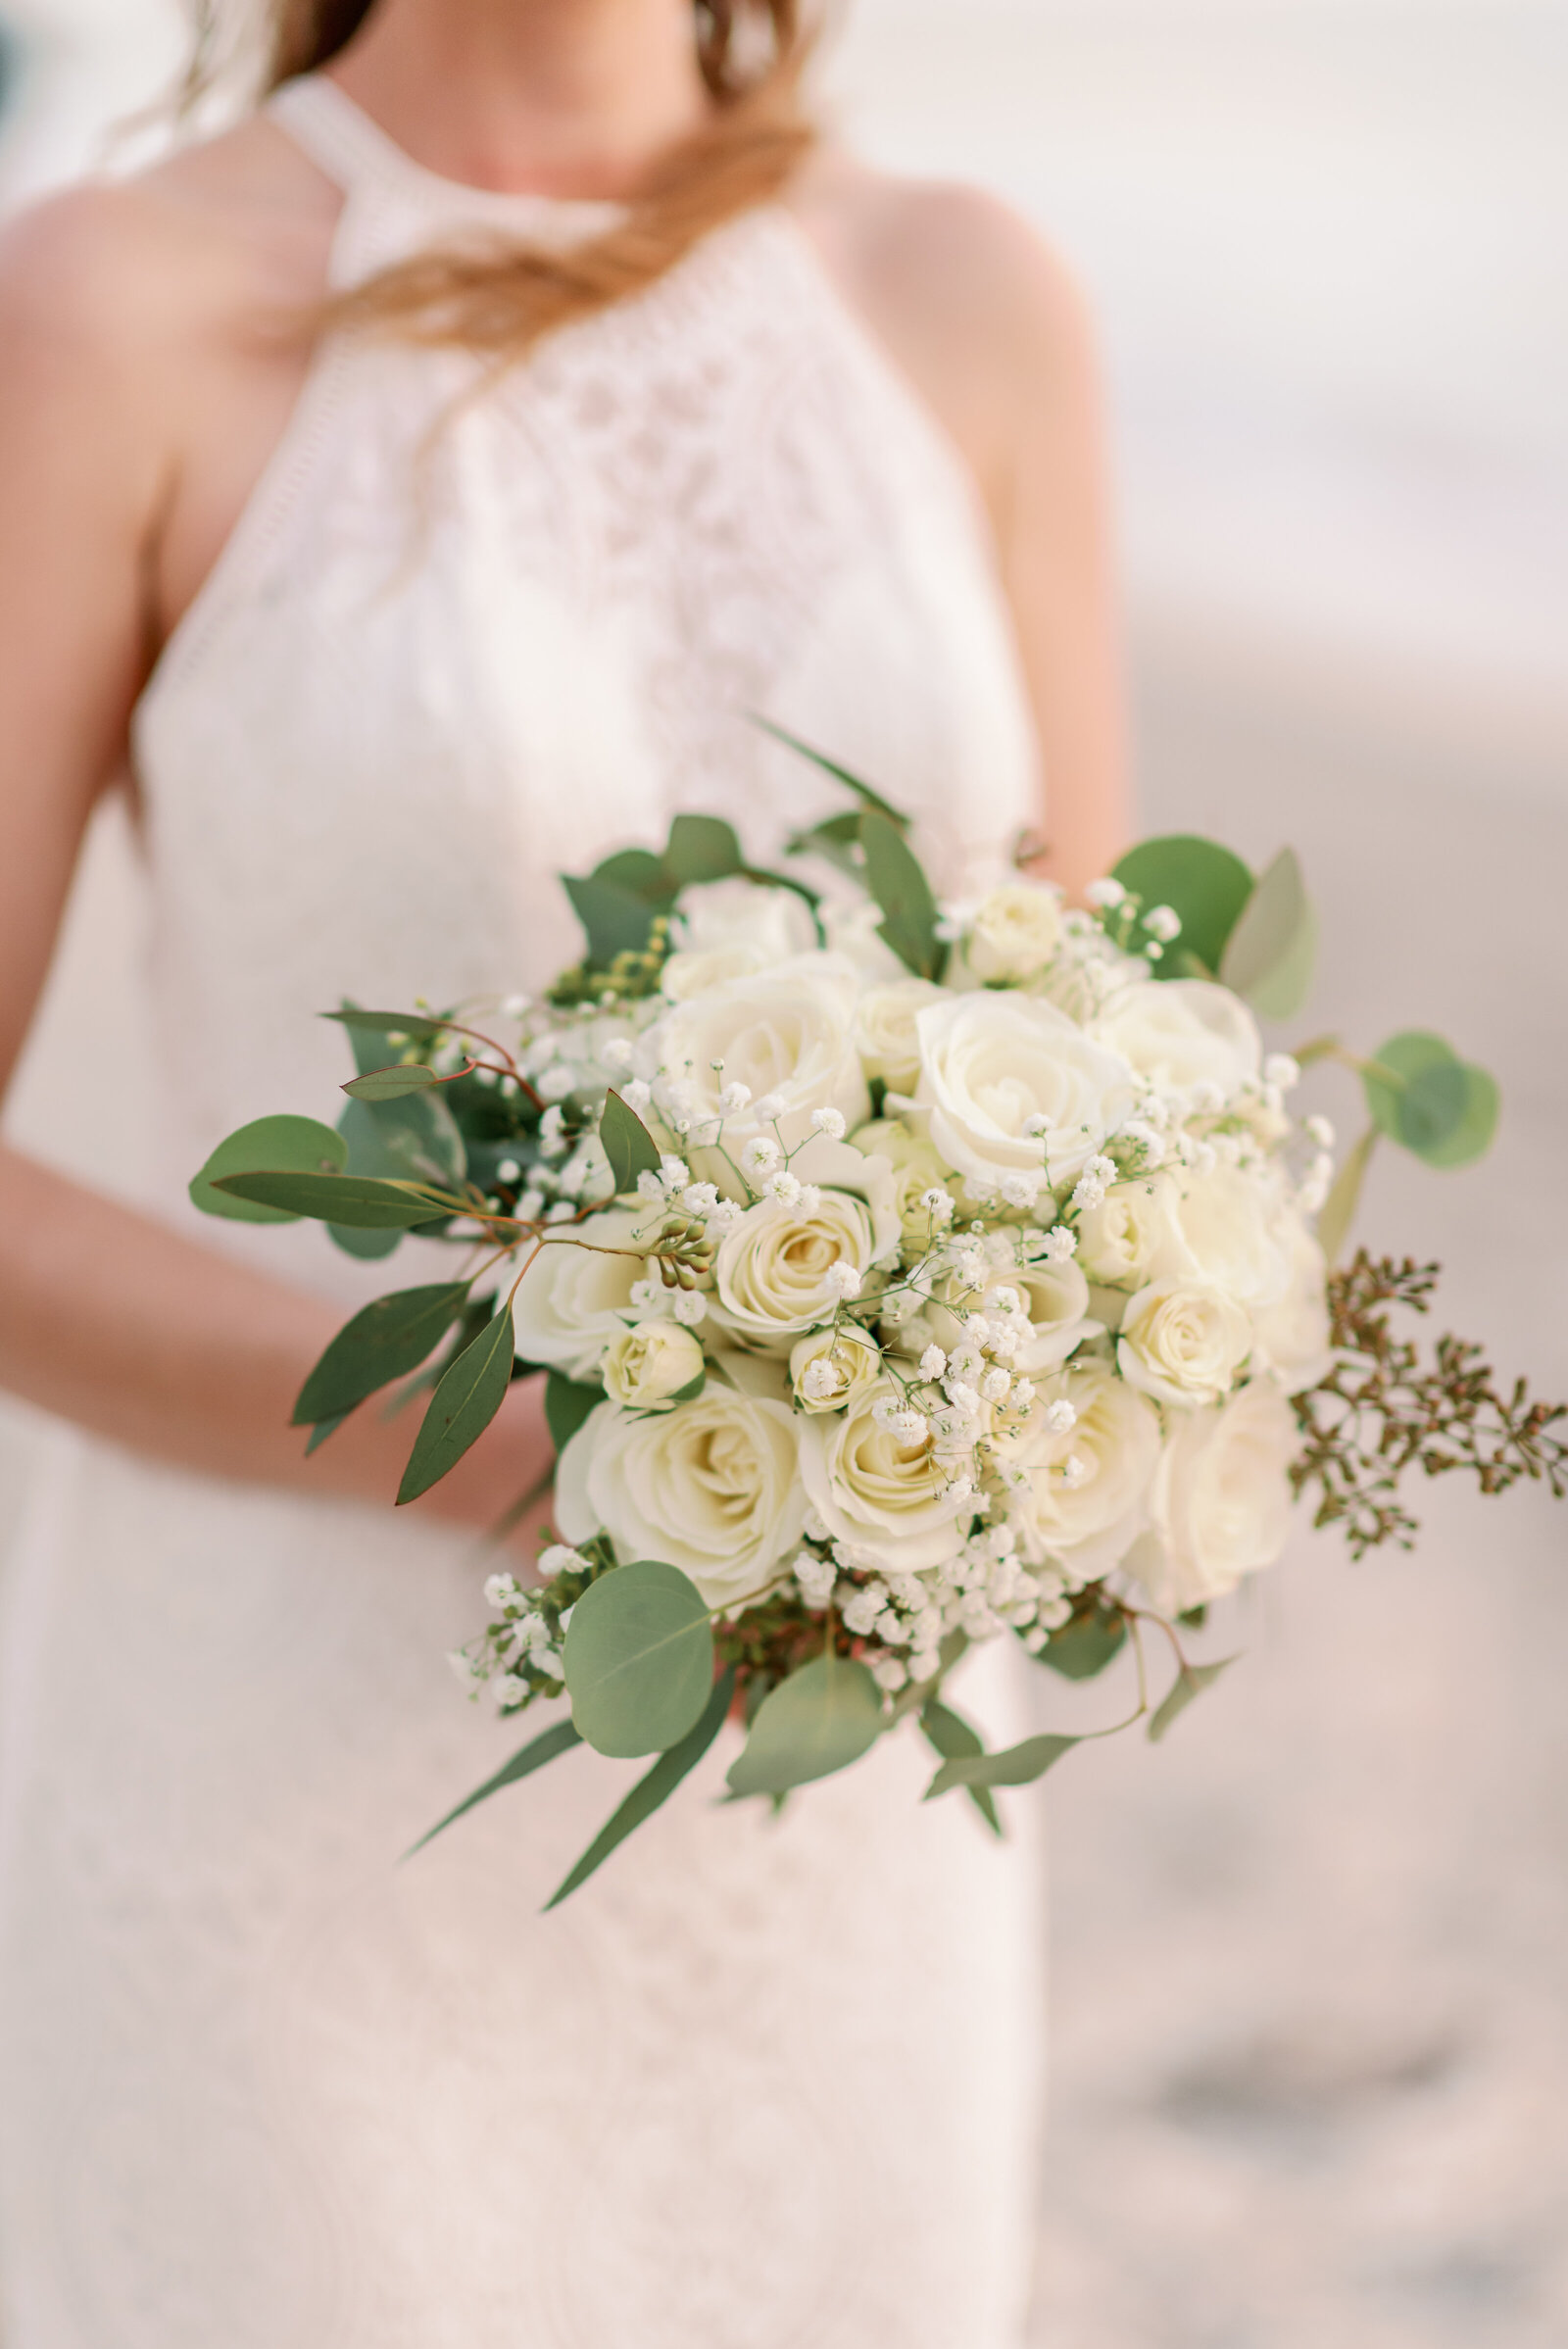 close up of brides bouquet showing white flowers and some greenery